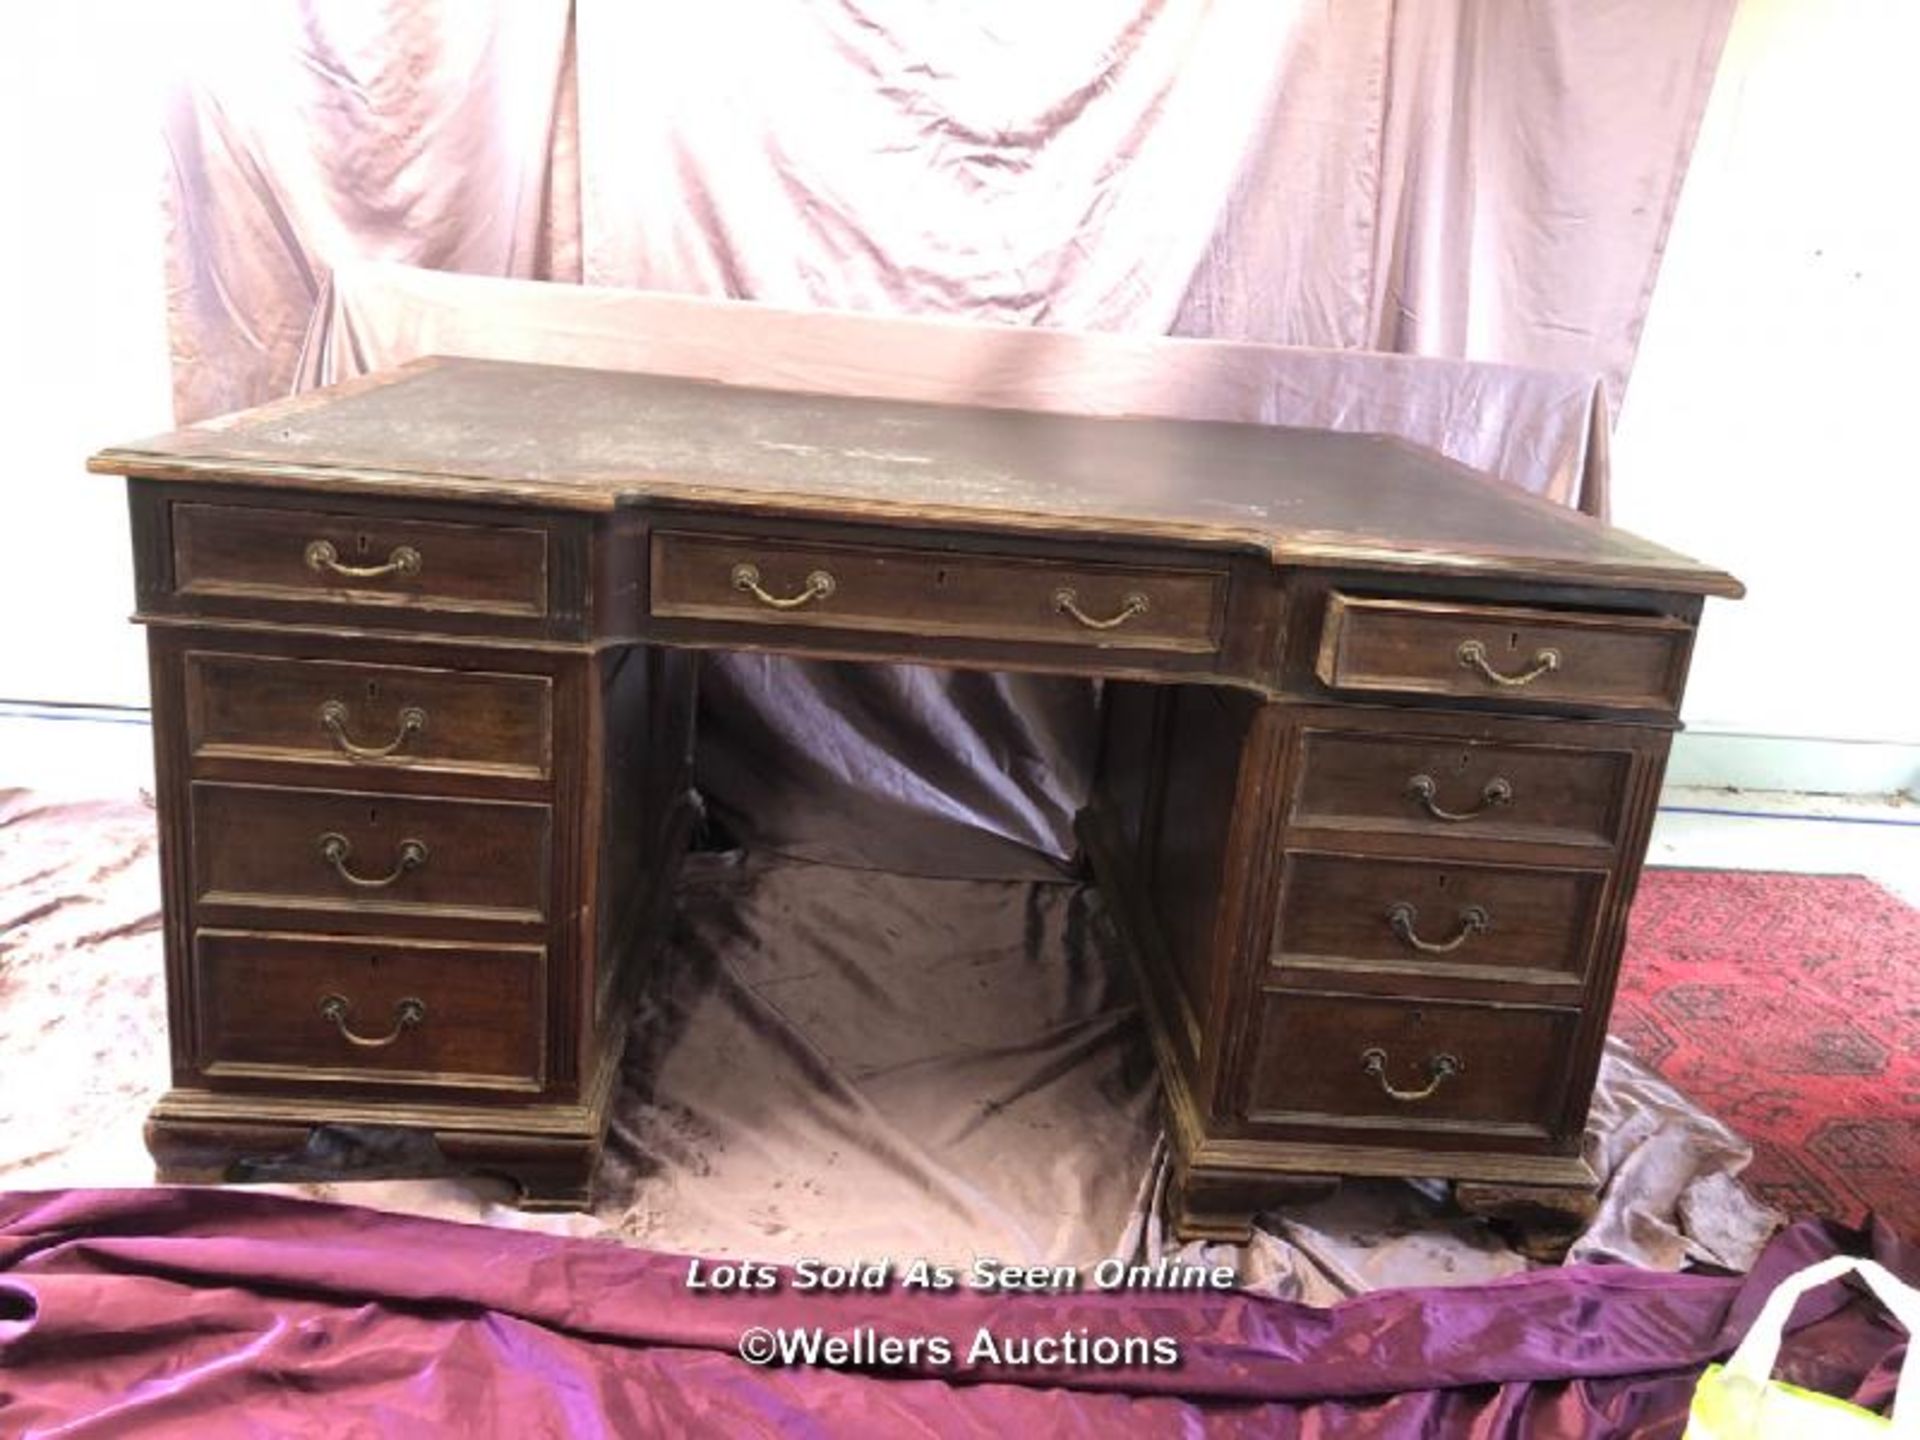 LARGE EDWARDIAN MAHOGANY PARTNERS DESK WITH LEATHER INLAID, COMPLETE WITH NINE DRAWERS TO ONE SIDE - Image 3 of 7